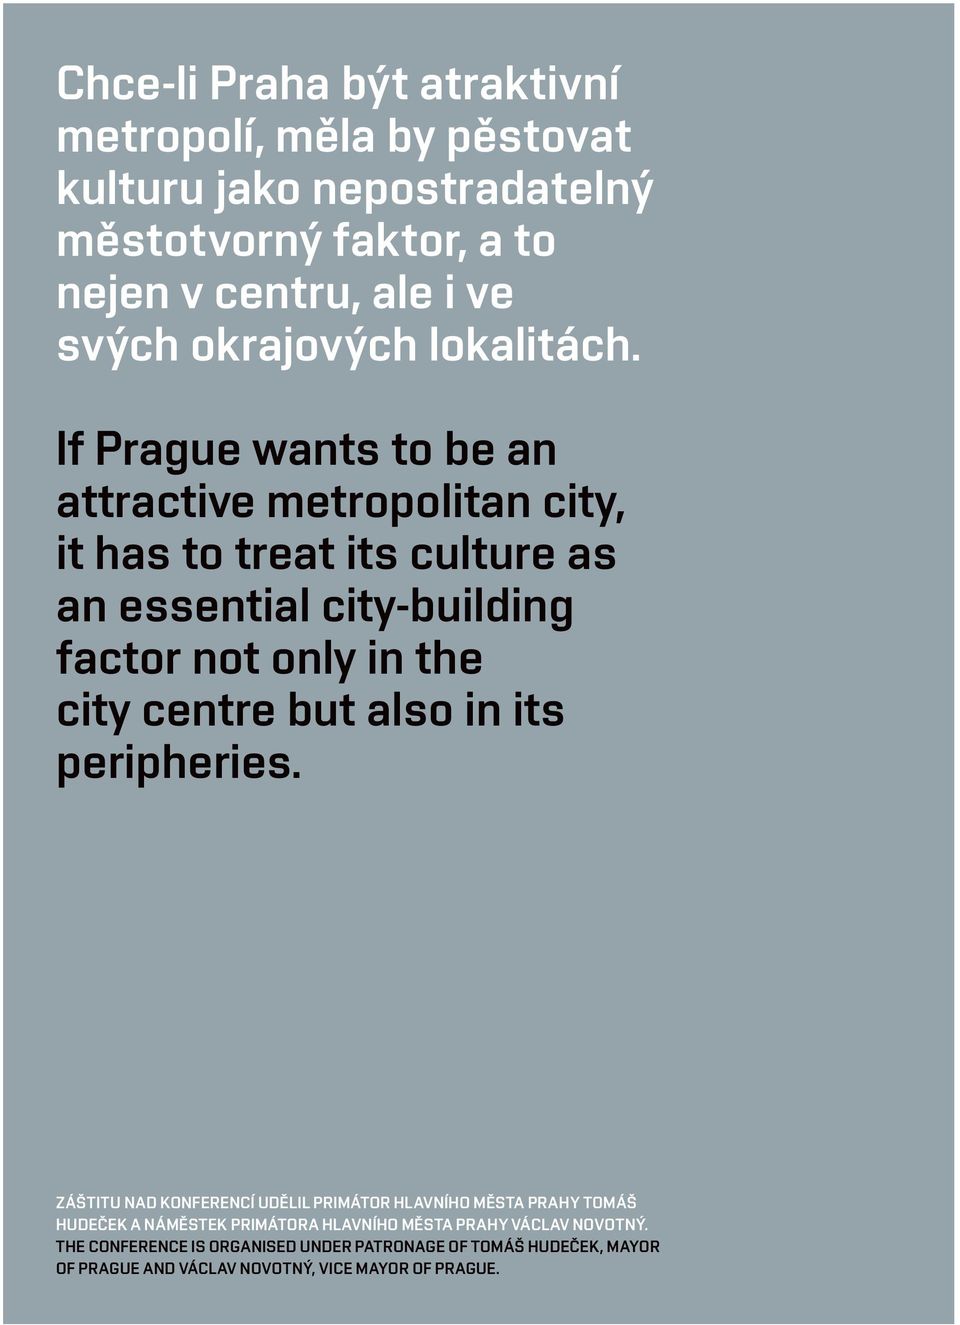 If Prague wants to be an attractive metropolitan city, it has to treat its culture as an essential city-building factor not only in the city centre